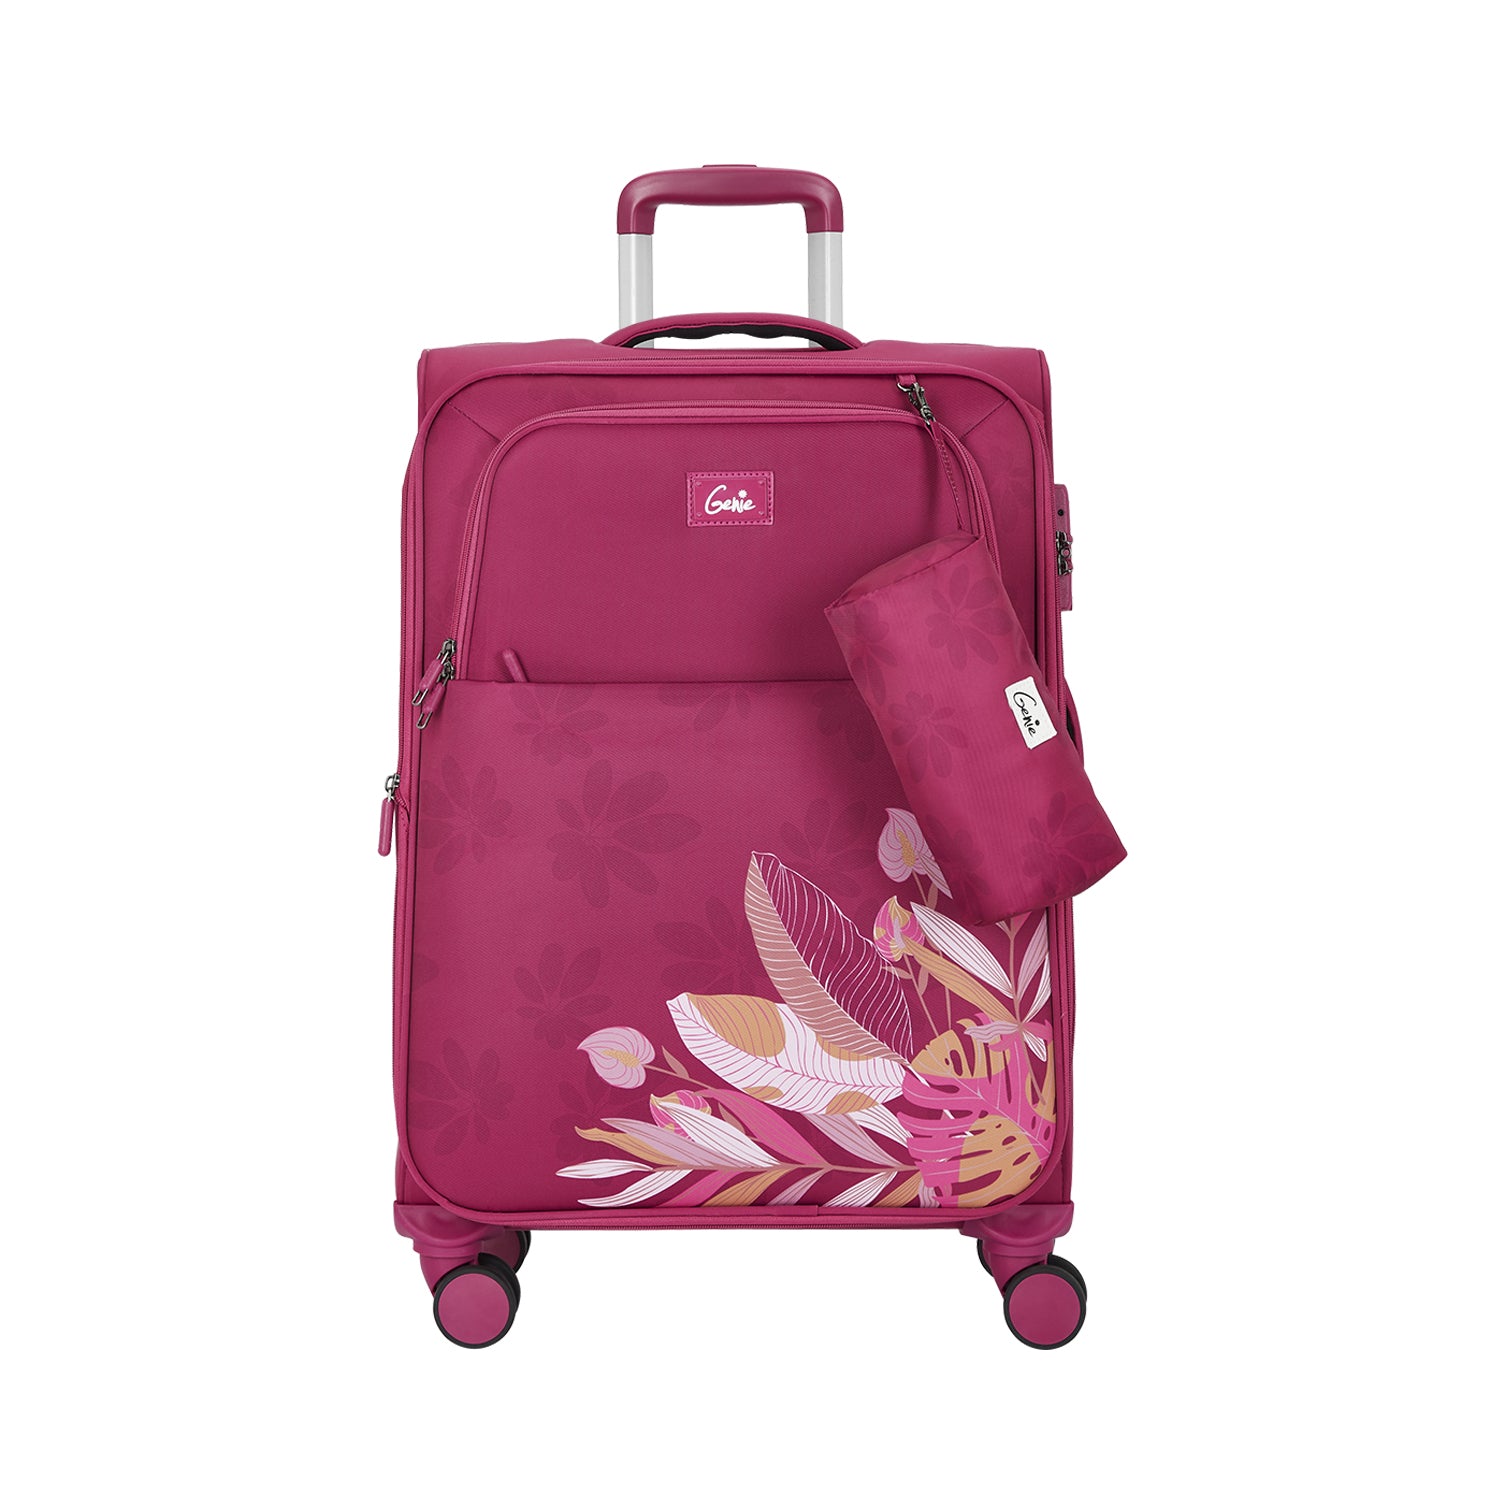 Bloom Soft Luggage- Wine Red